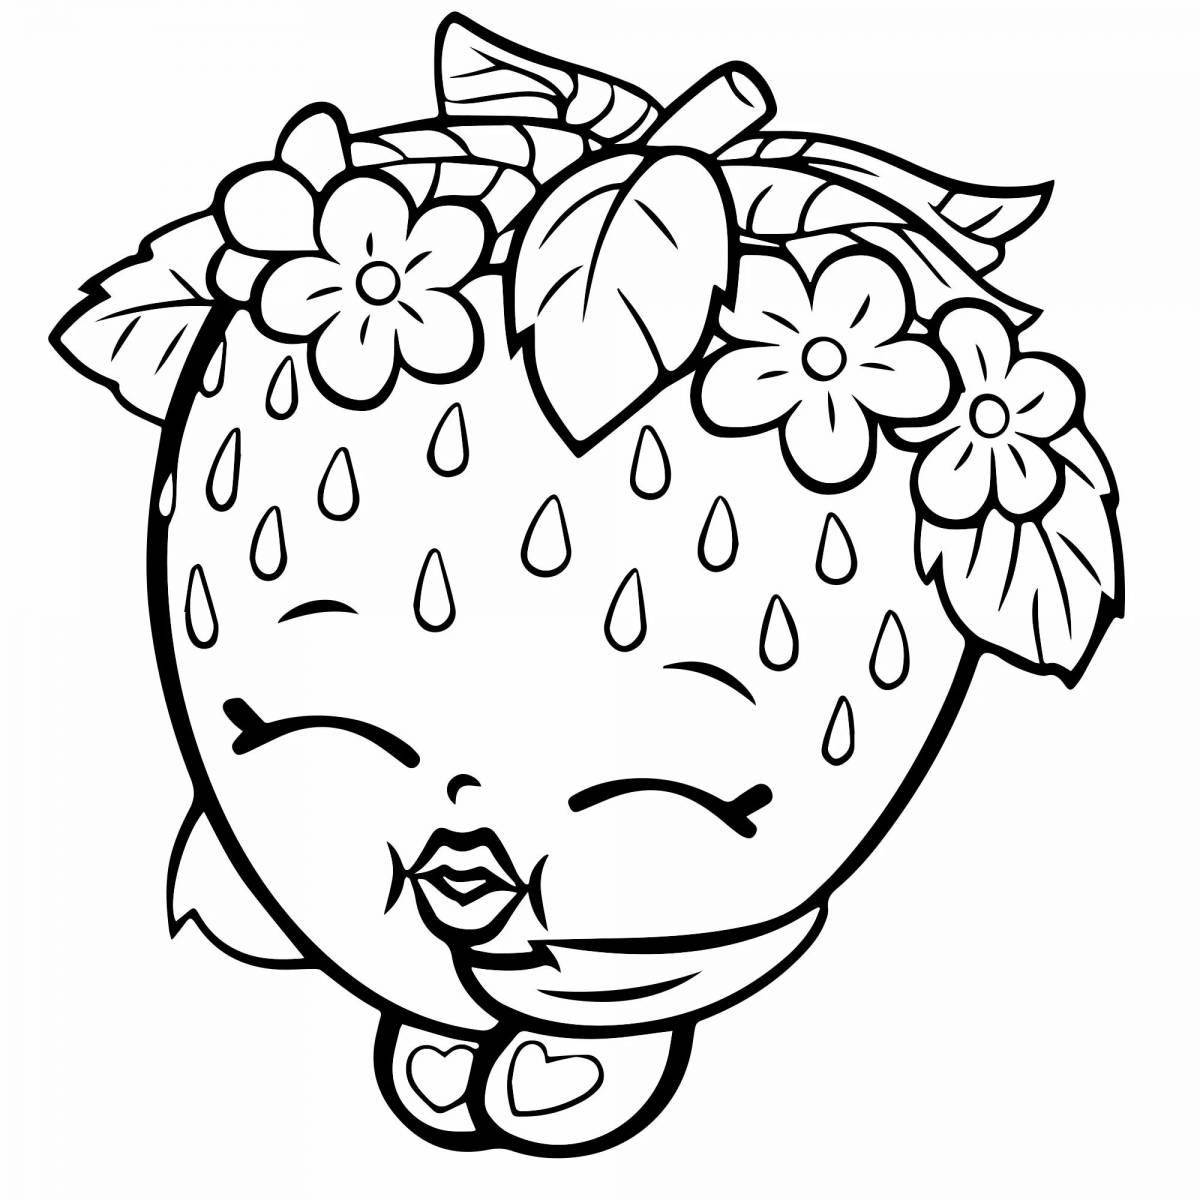 Coloring pages for girls with colorful smile